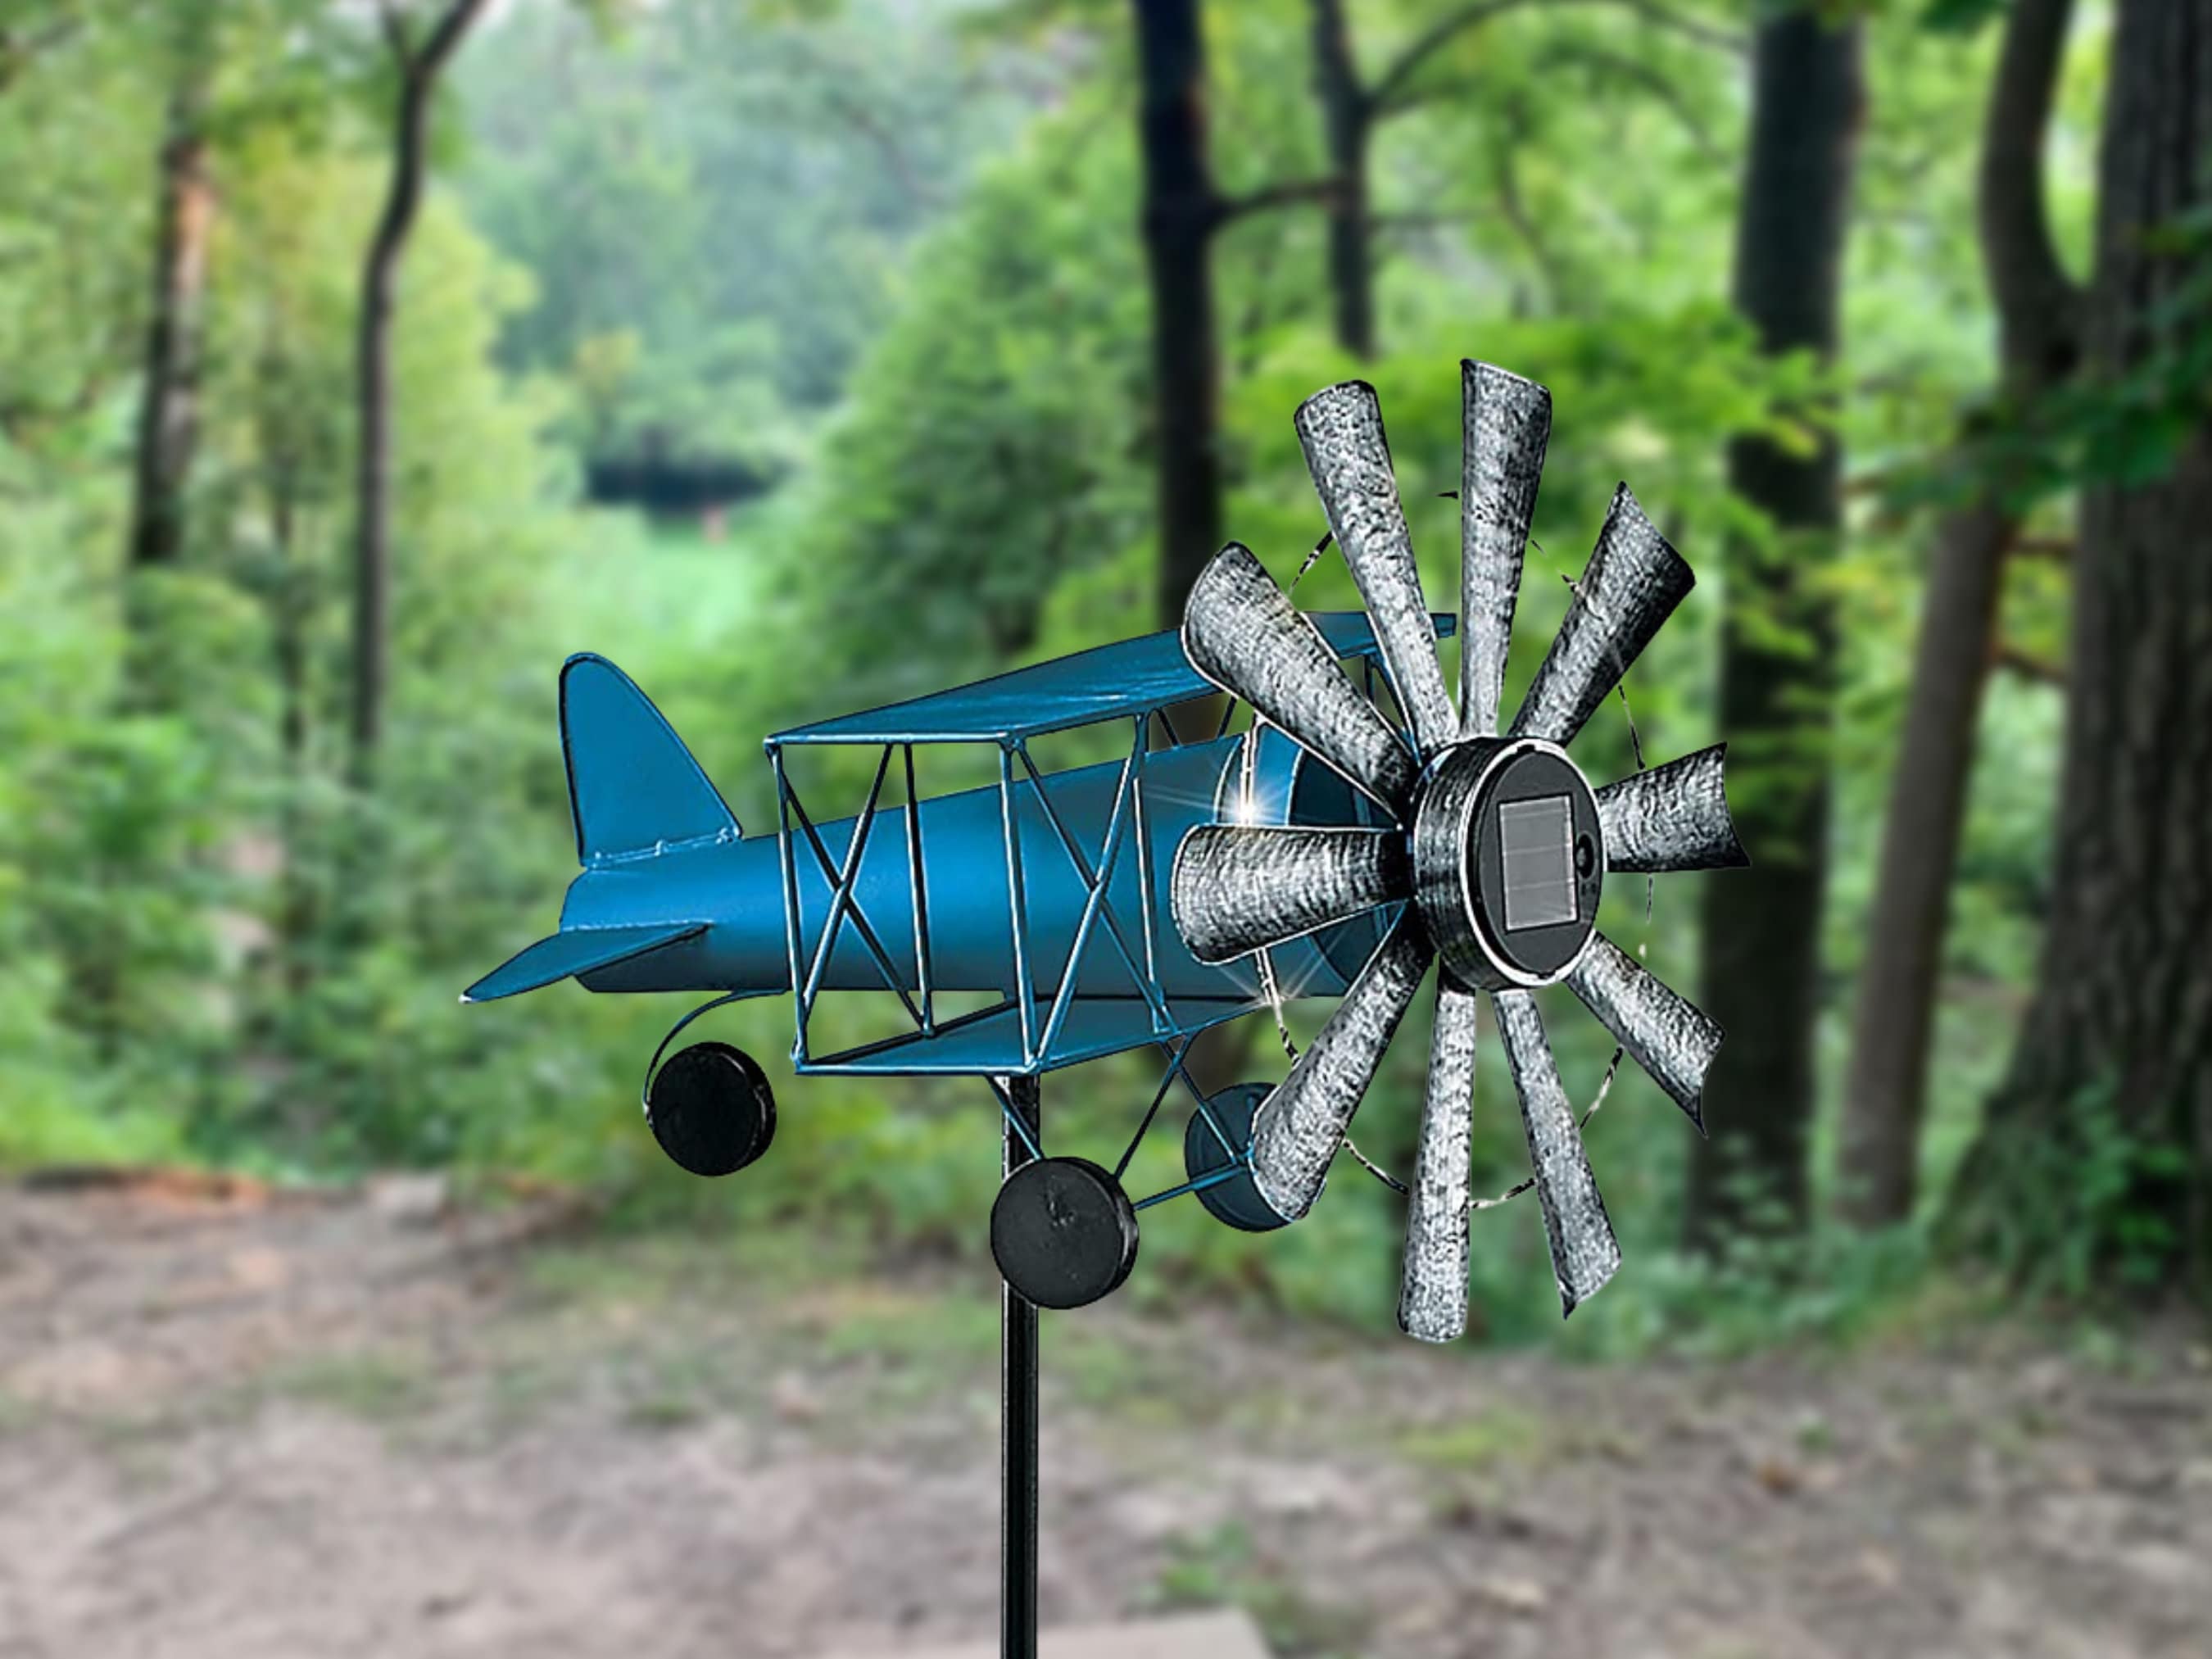 Airplane Wind Spinner Kinetic Metal Art Garden Sculpture for Lawn